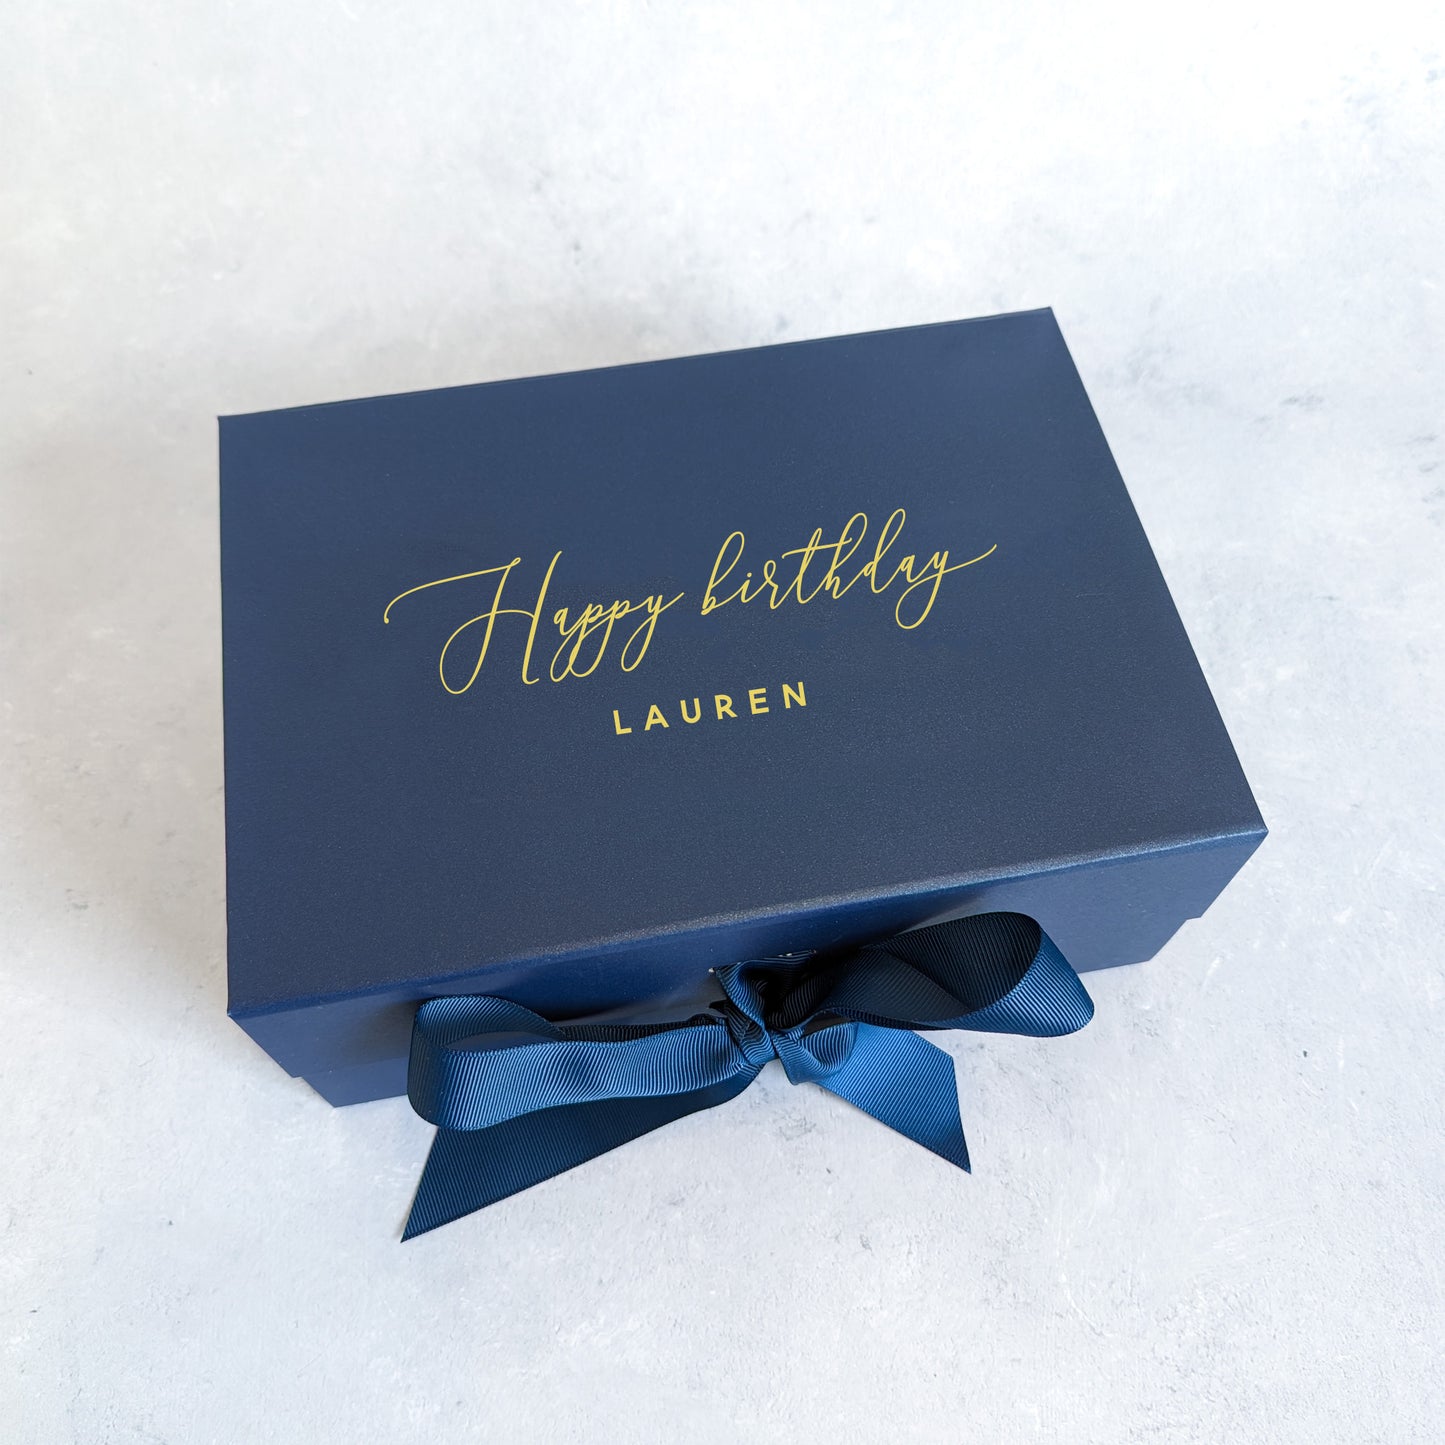 Personalised Happy Birthday or Anniversary Gift Box - Medium A5 Size